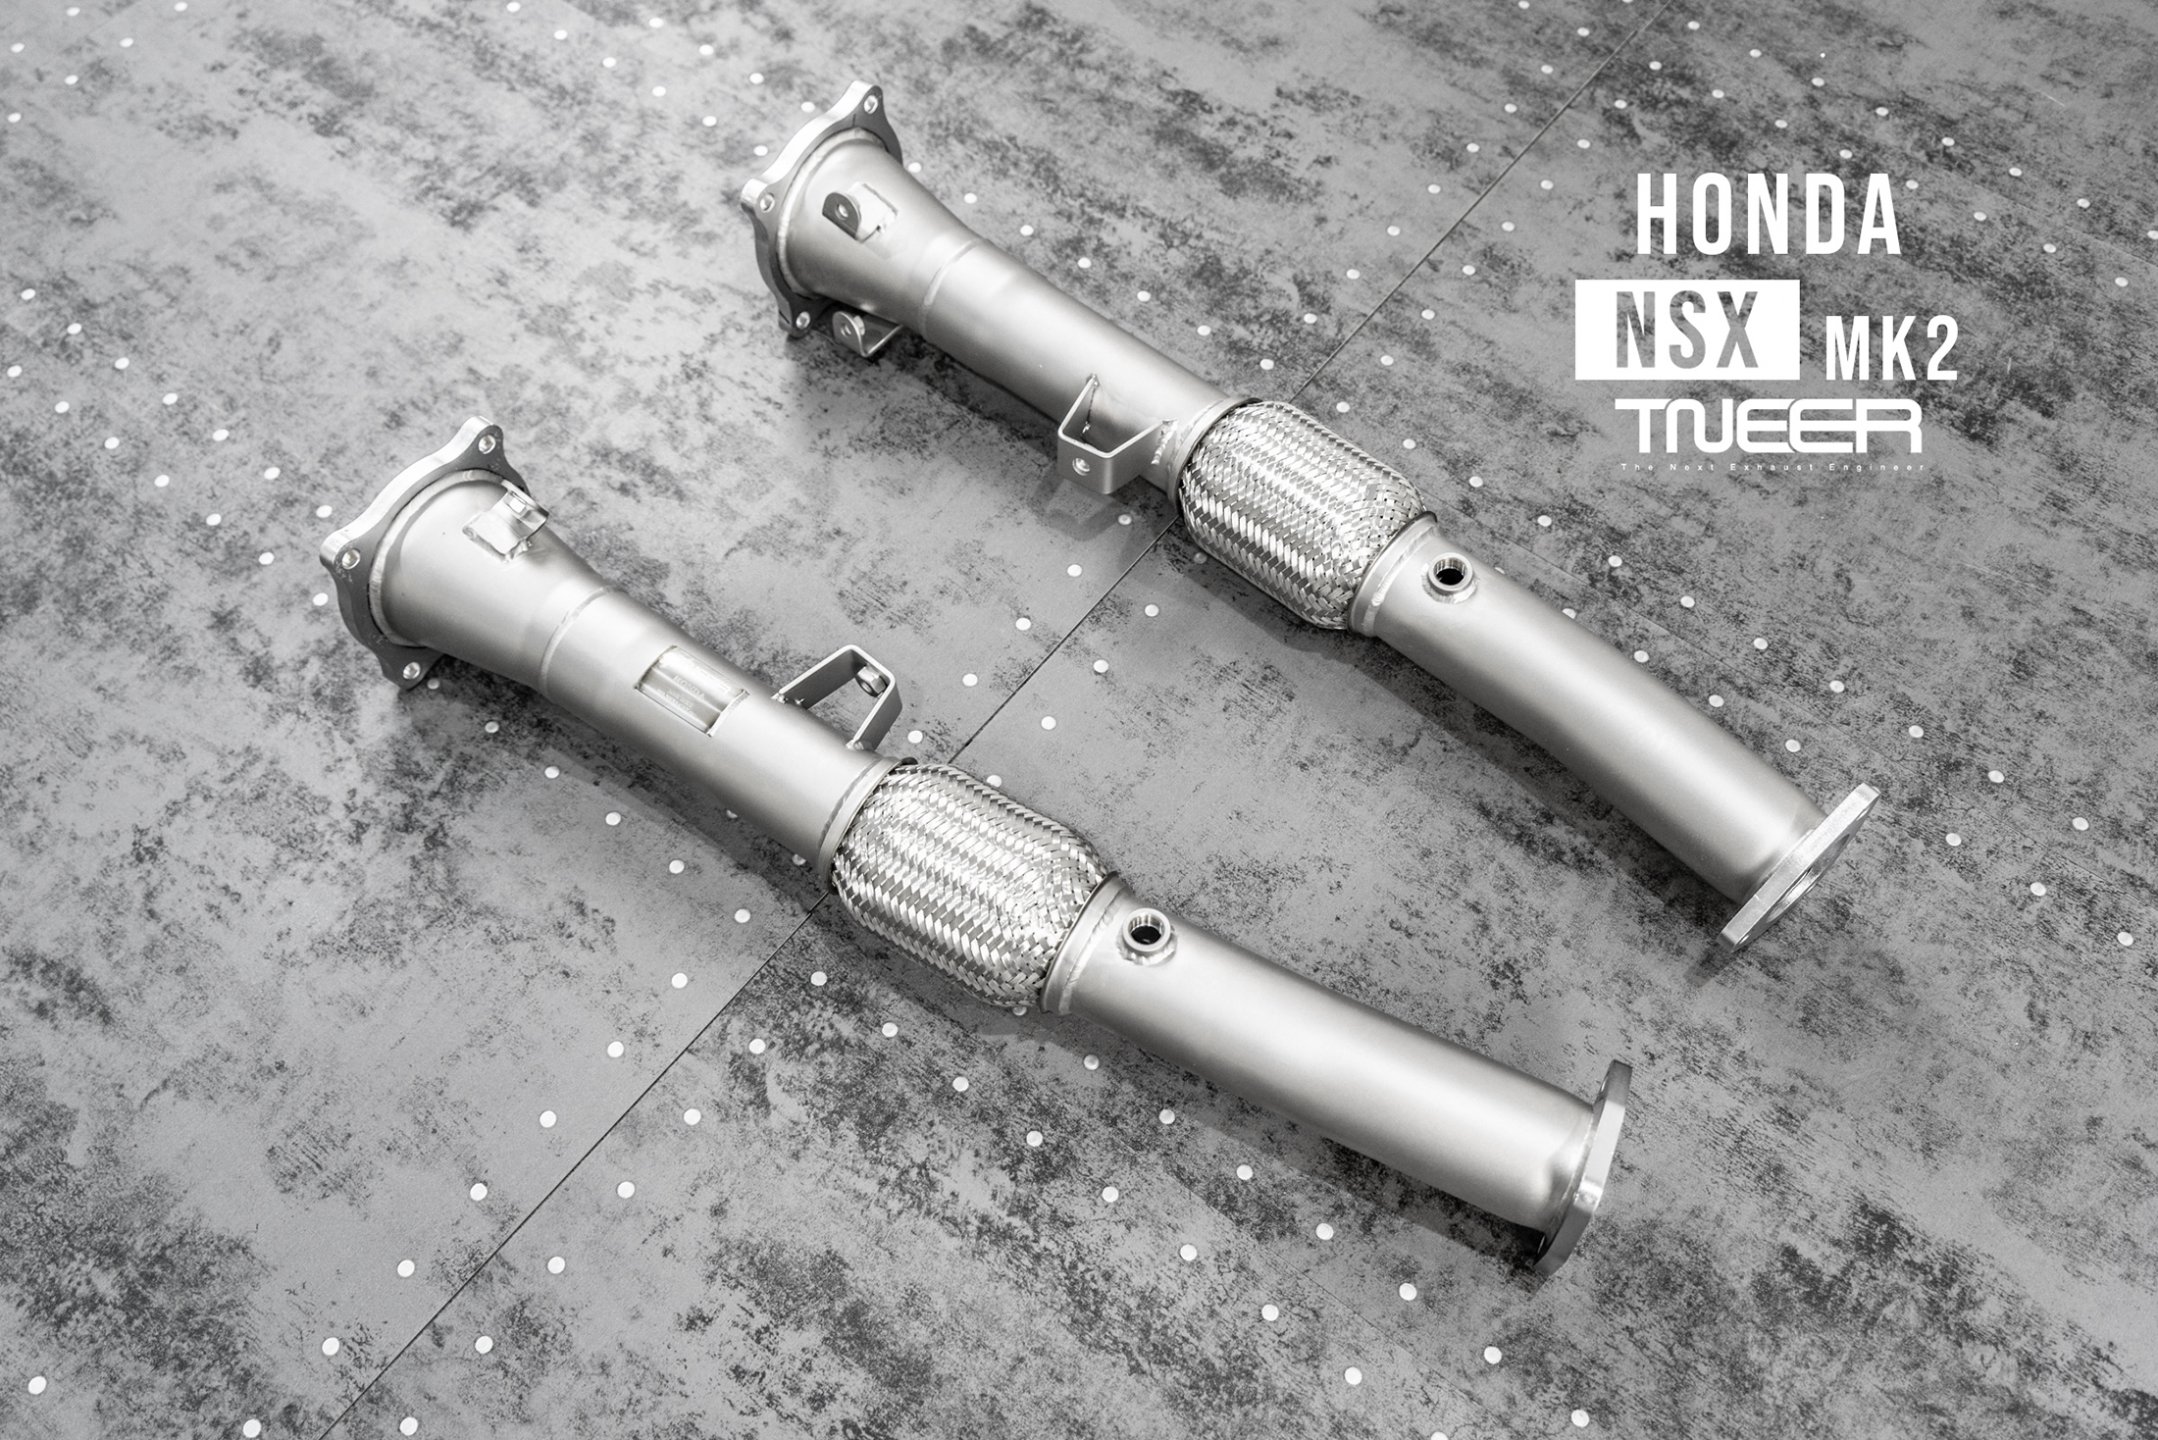 BMW F93 (M8 Gran Coupe) TNEER Exhaust System with EV Control